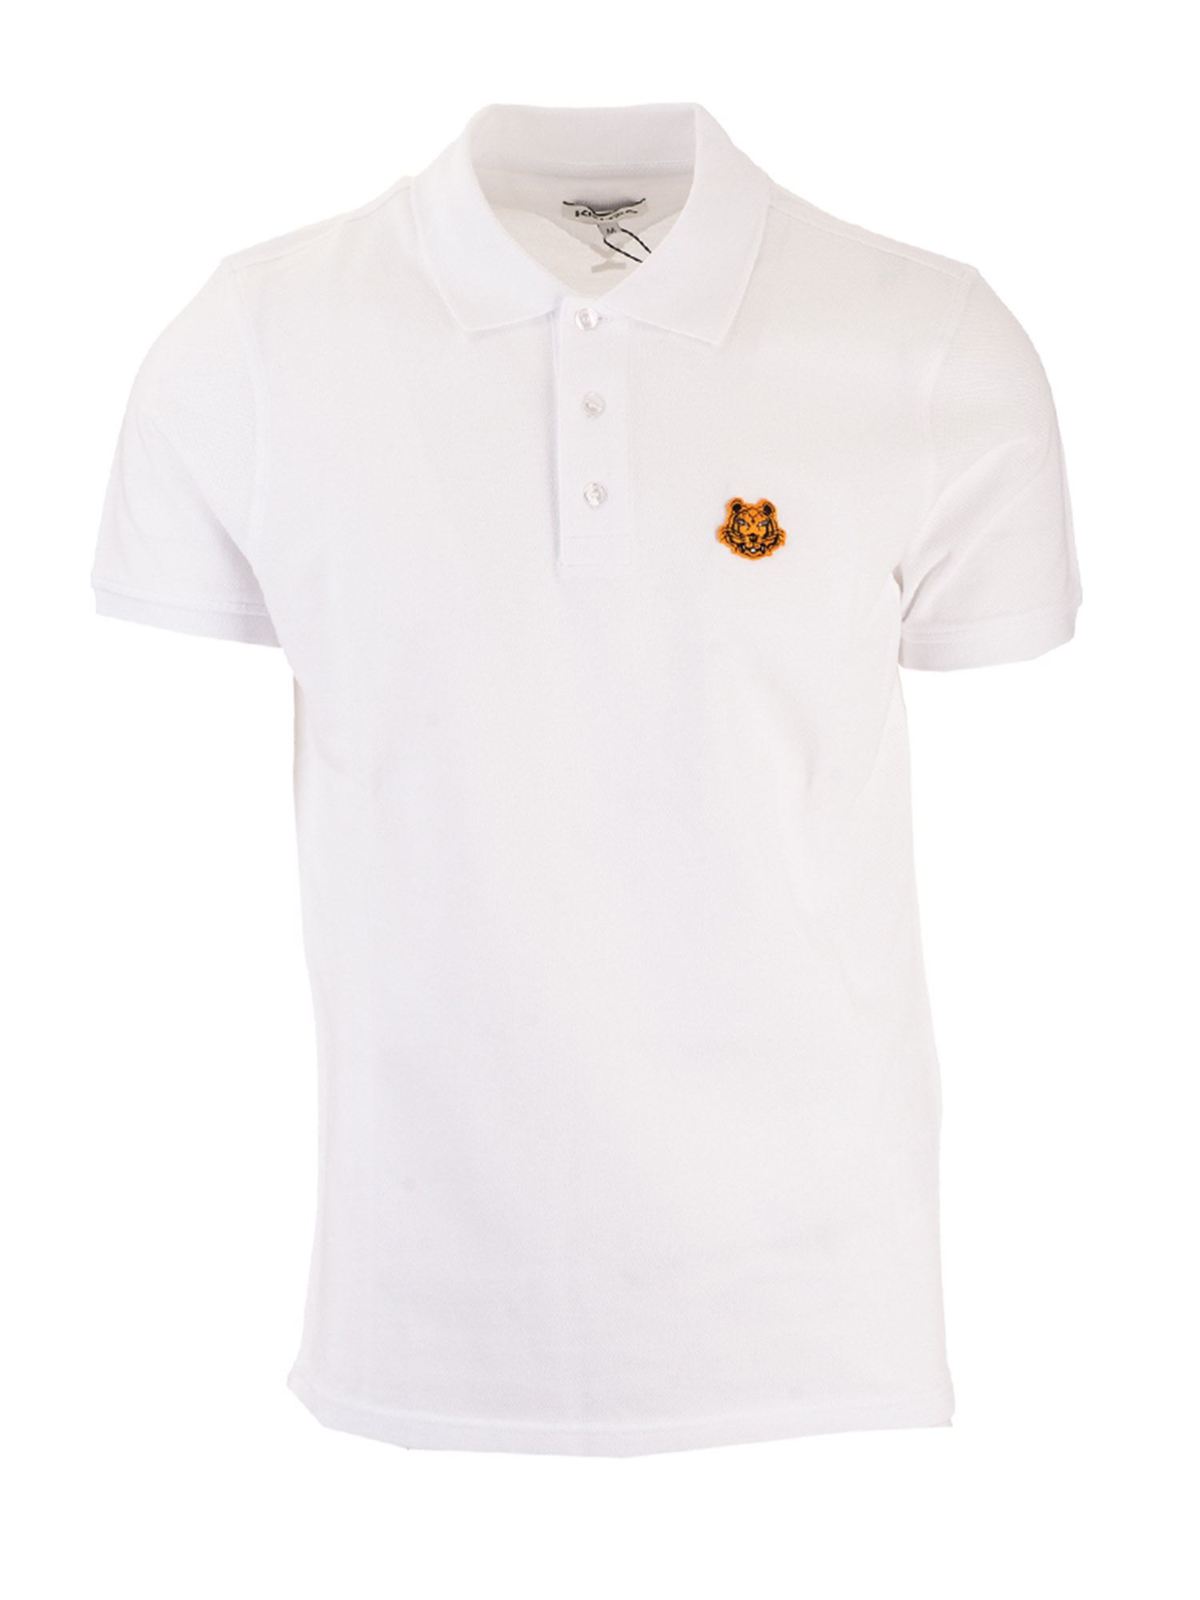 Kenzo - Tiger Crest polo shirt in white 